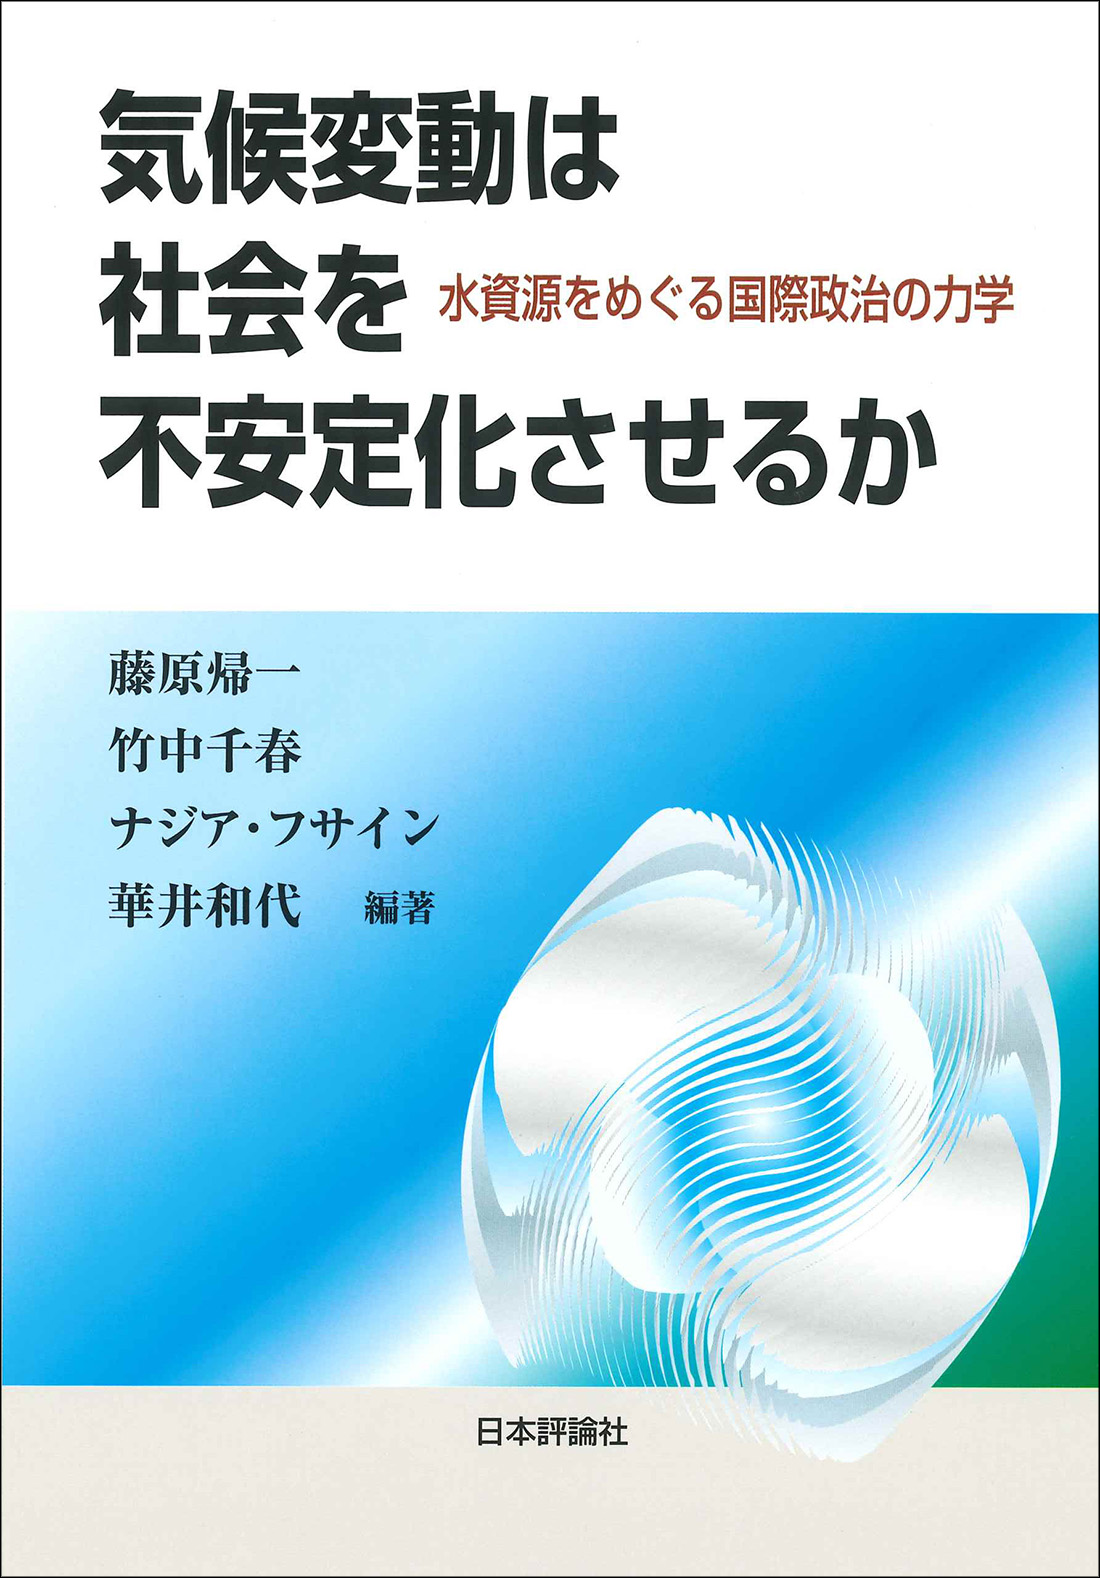 A blue cover with an illustration of white abstract ball